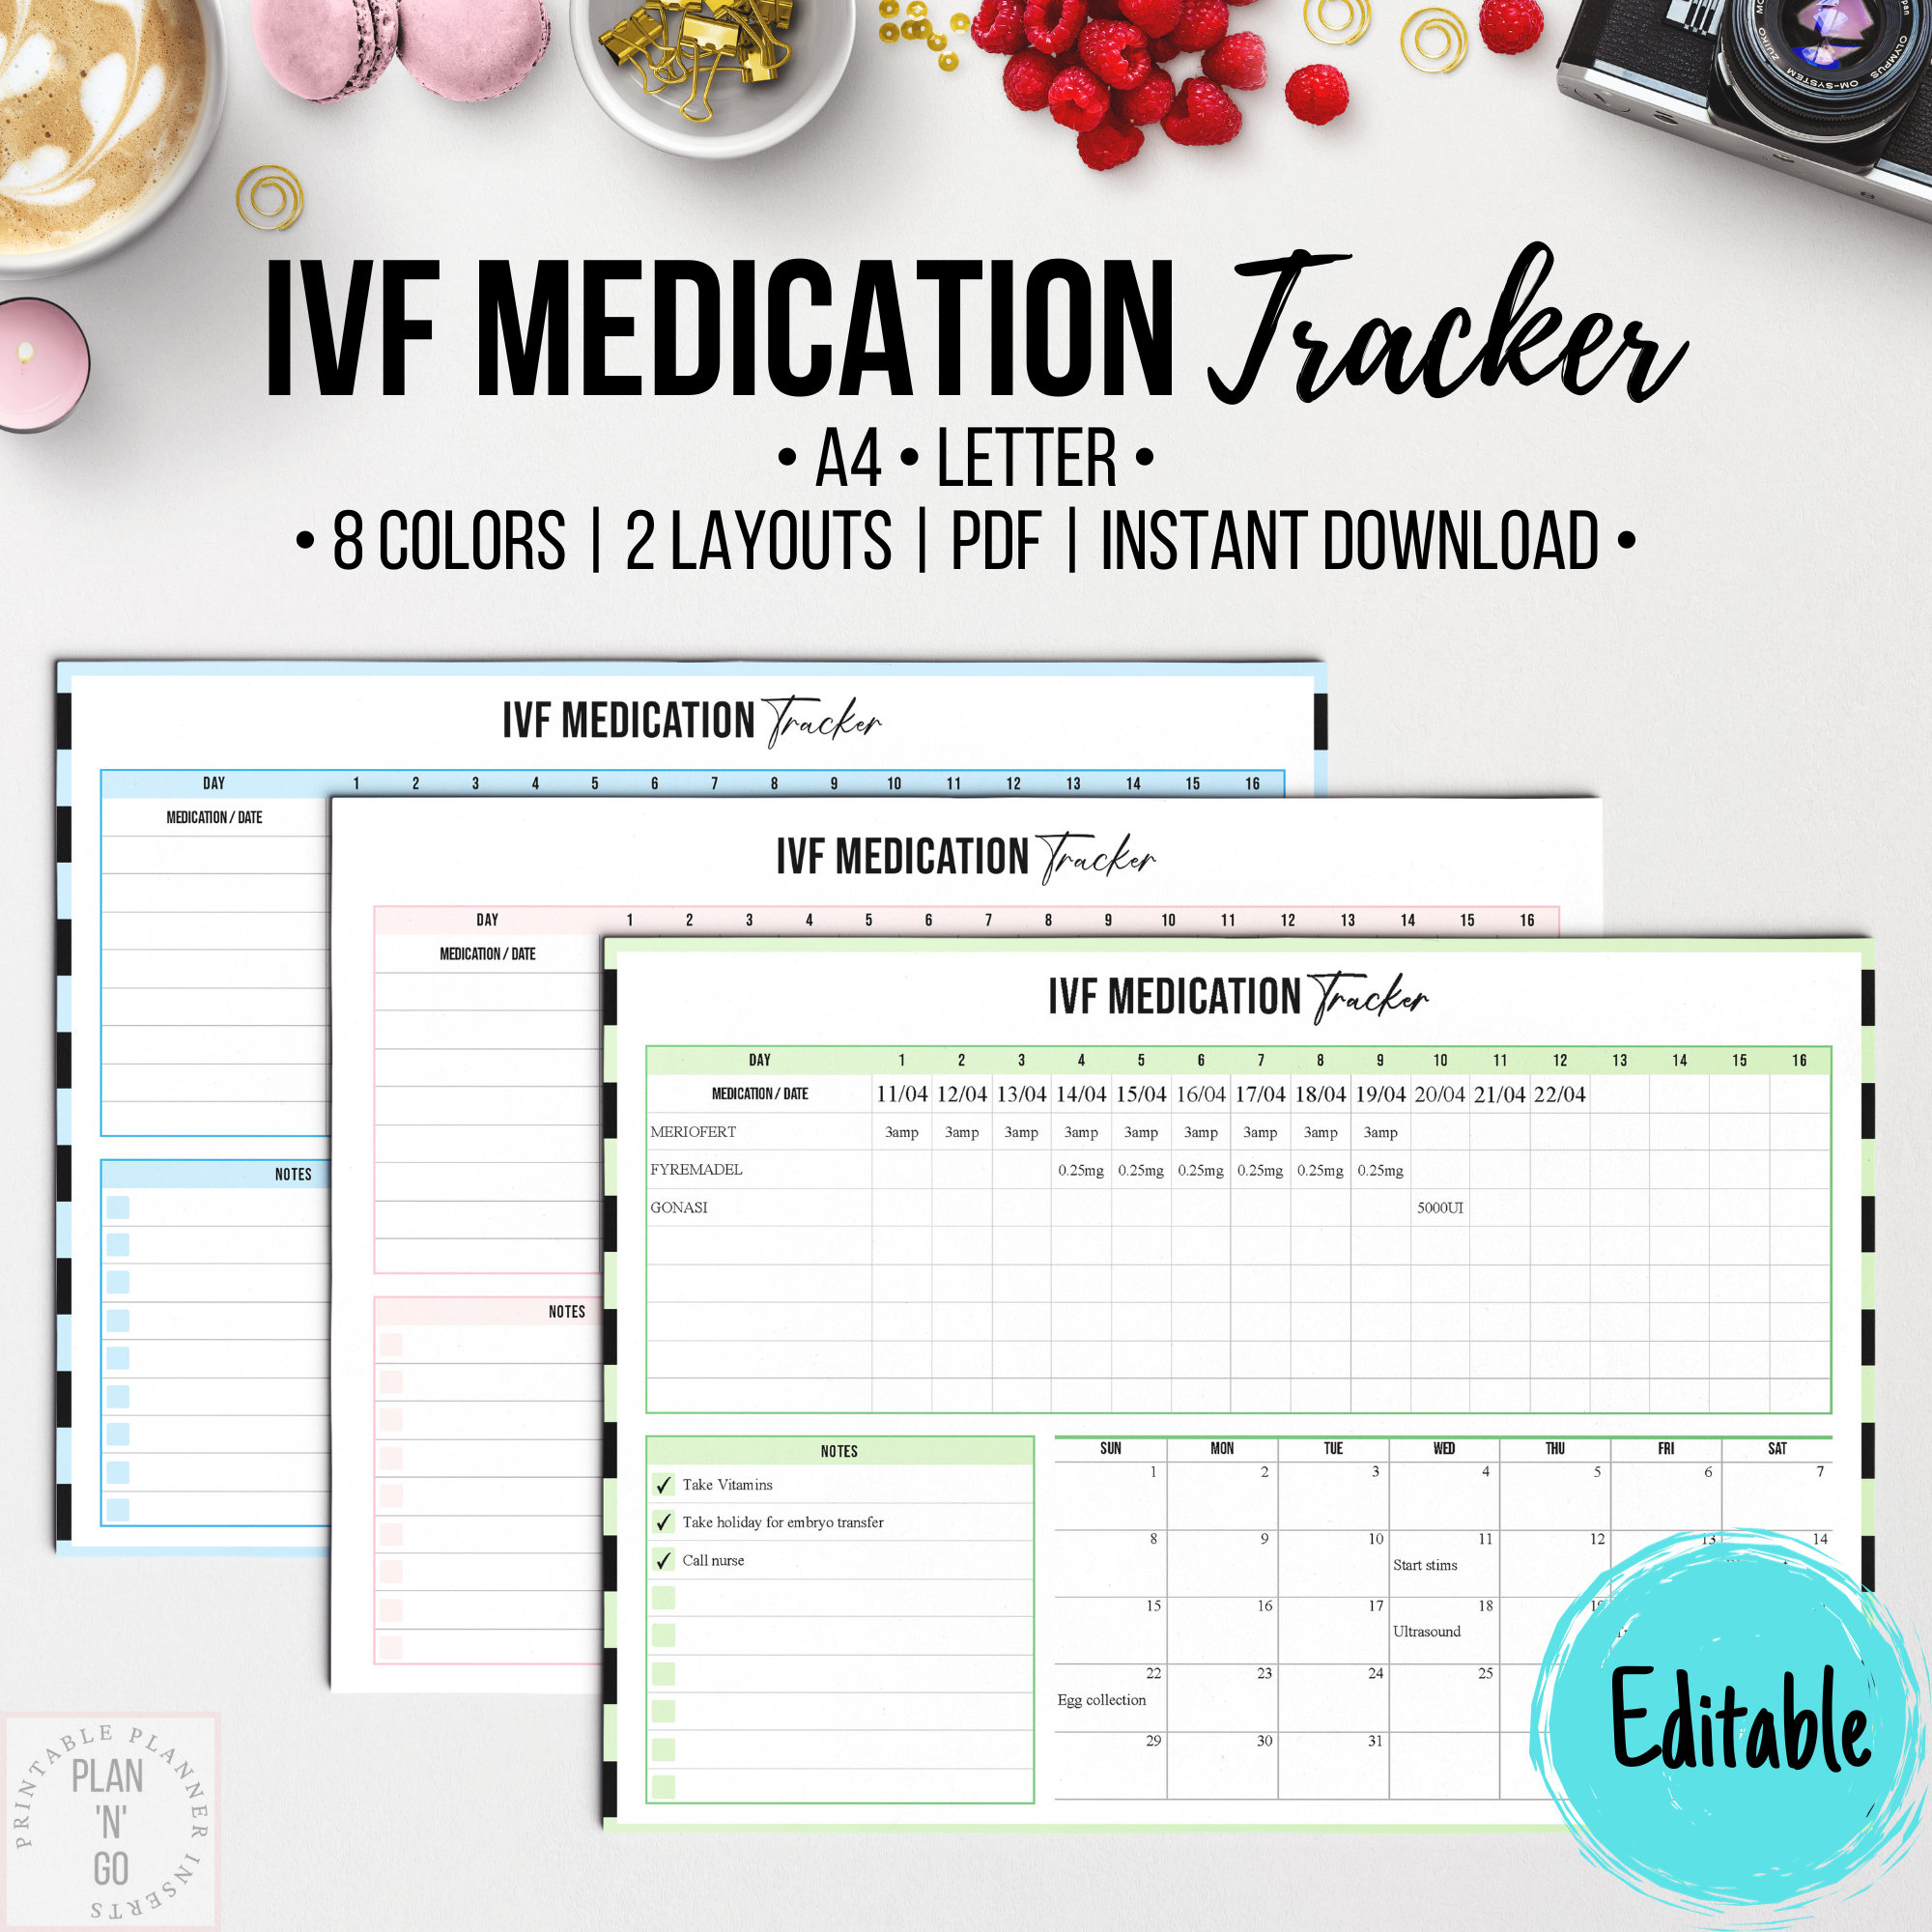 IVF meds organization - in a closet jewelry organizer. This has really  helped us keep things neat and out of sight when needed.